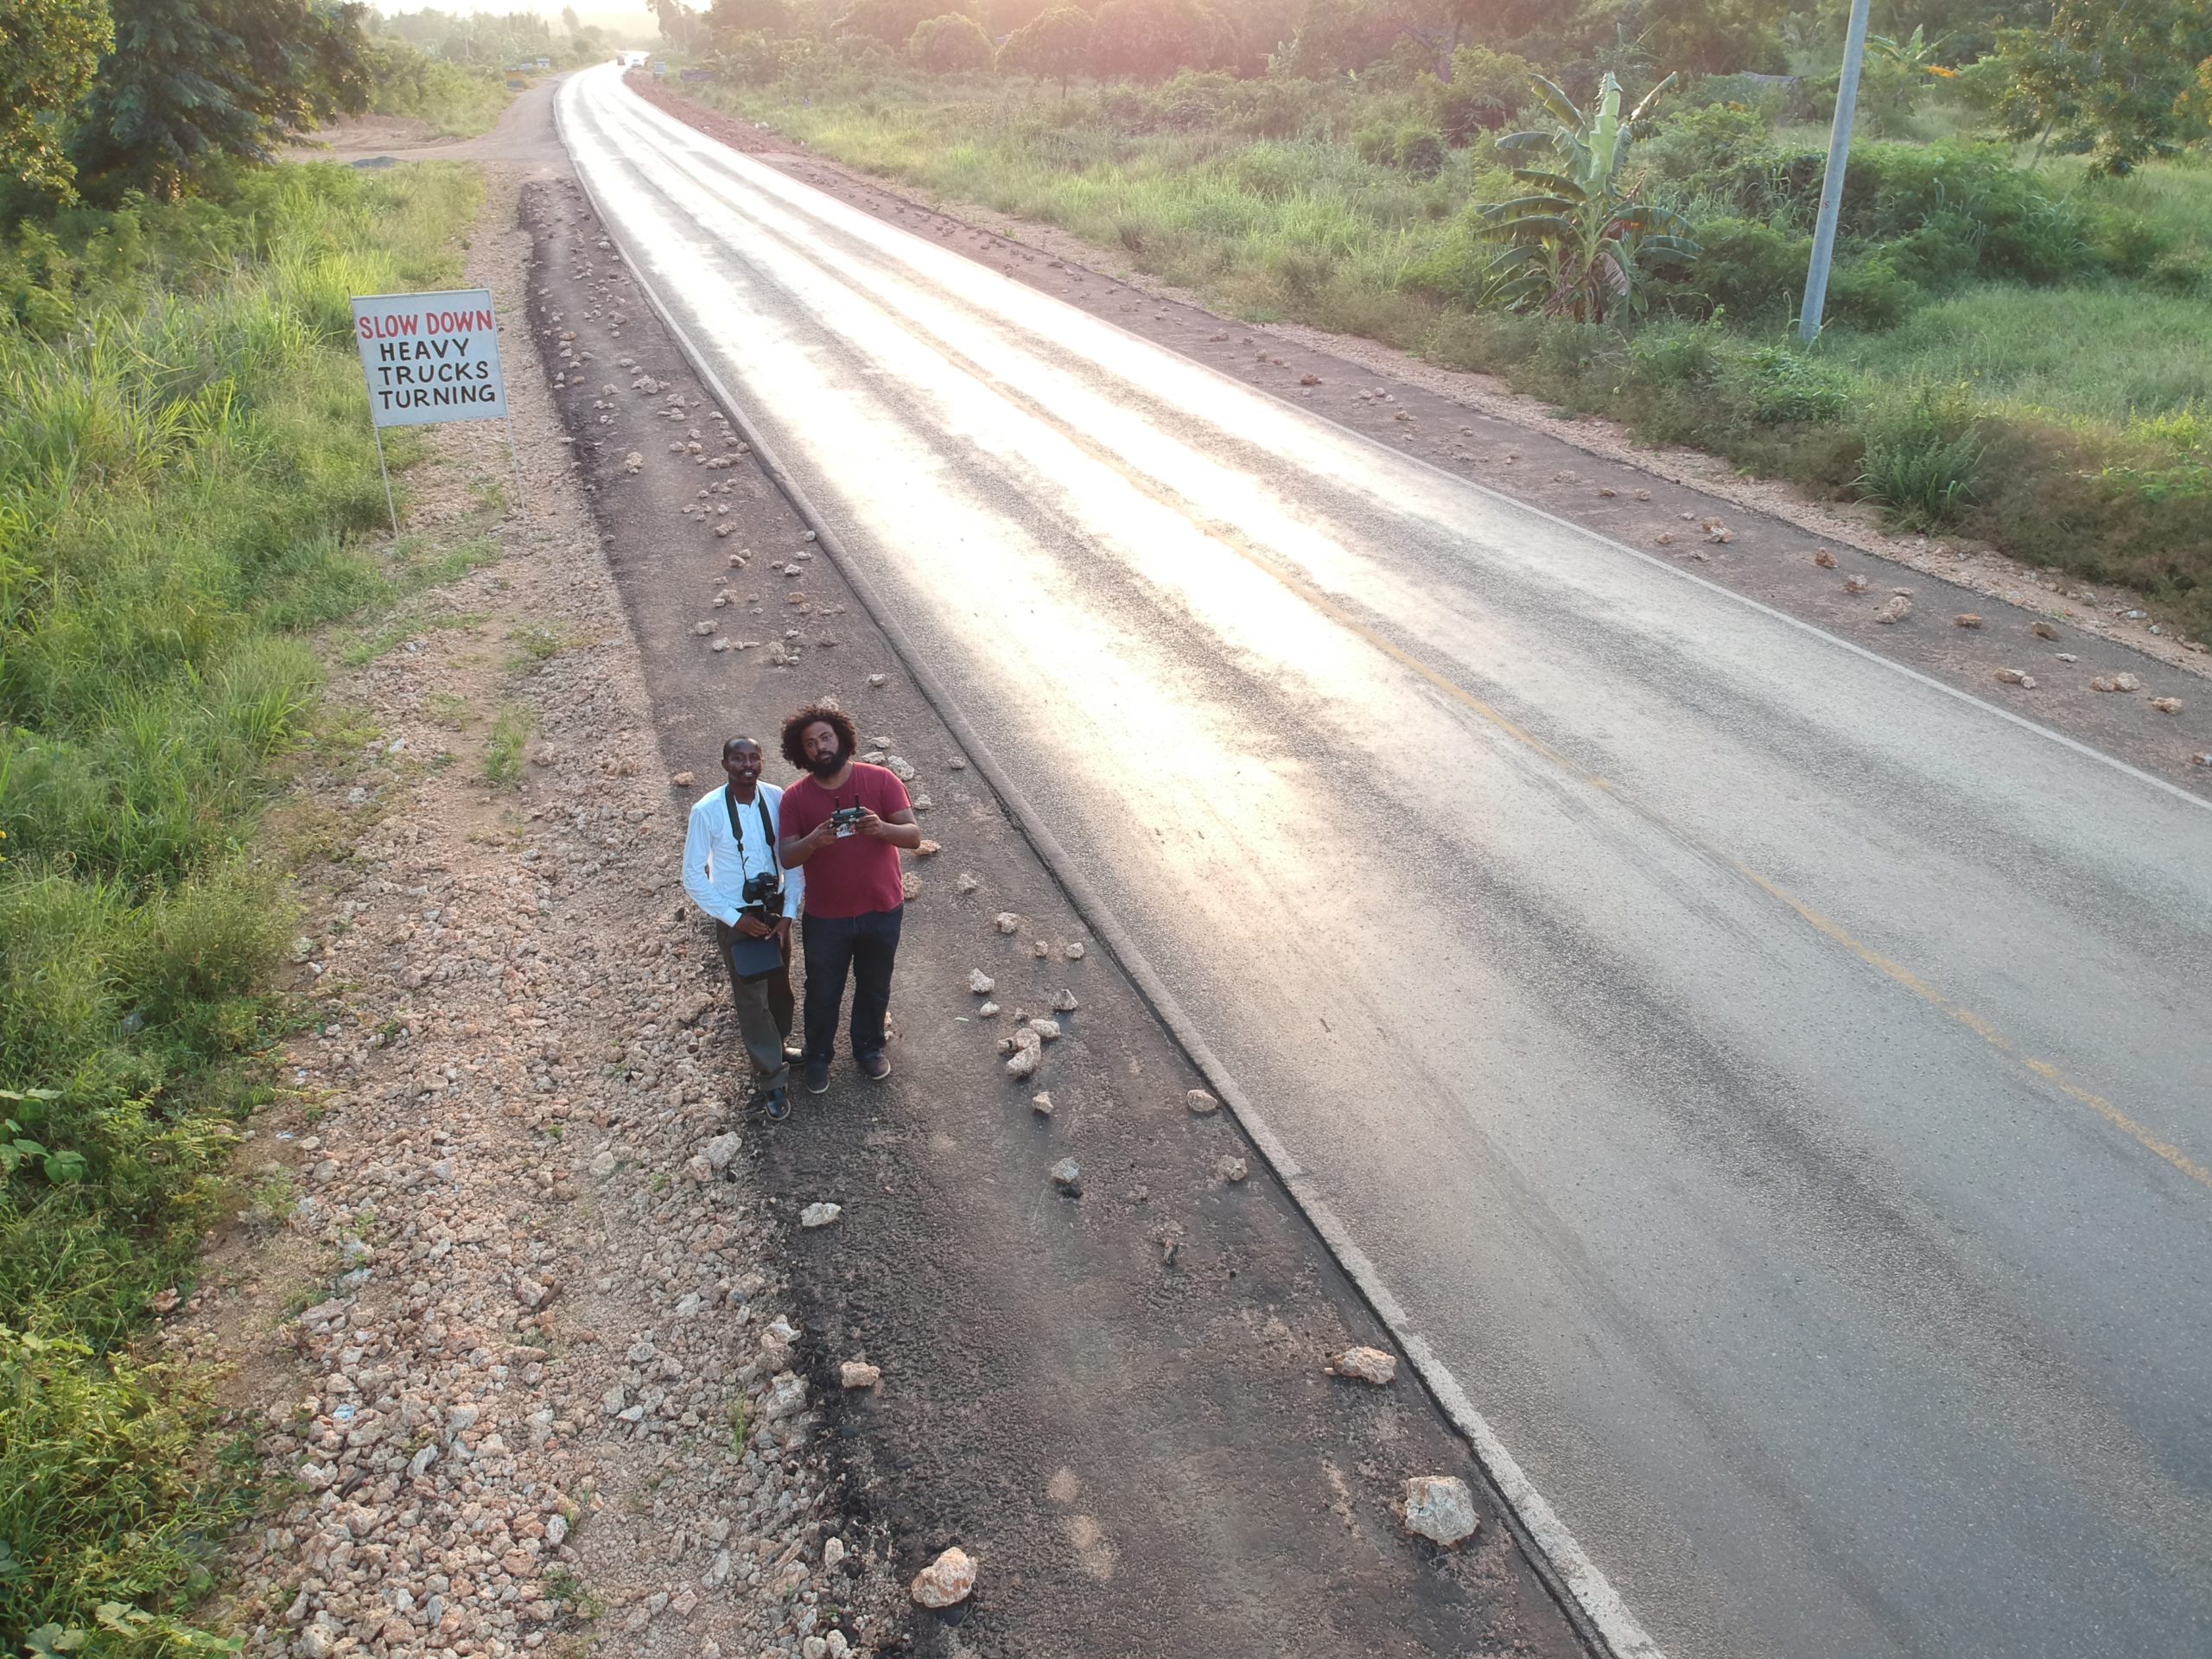 Two people stand on the shoulder of a paved road with scattered rocks. A visible sign on the left reads 